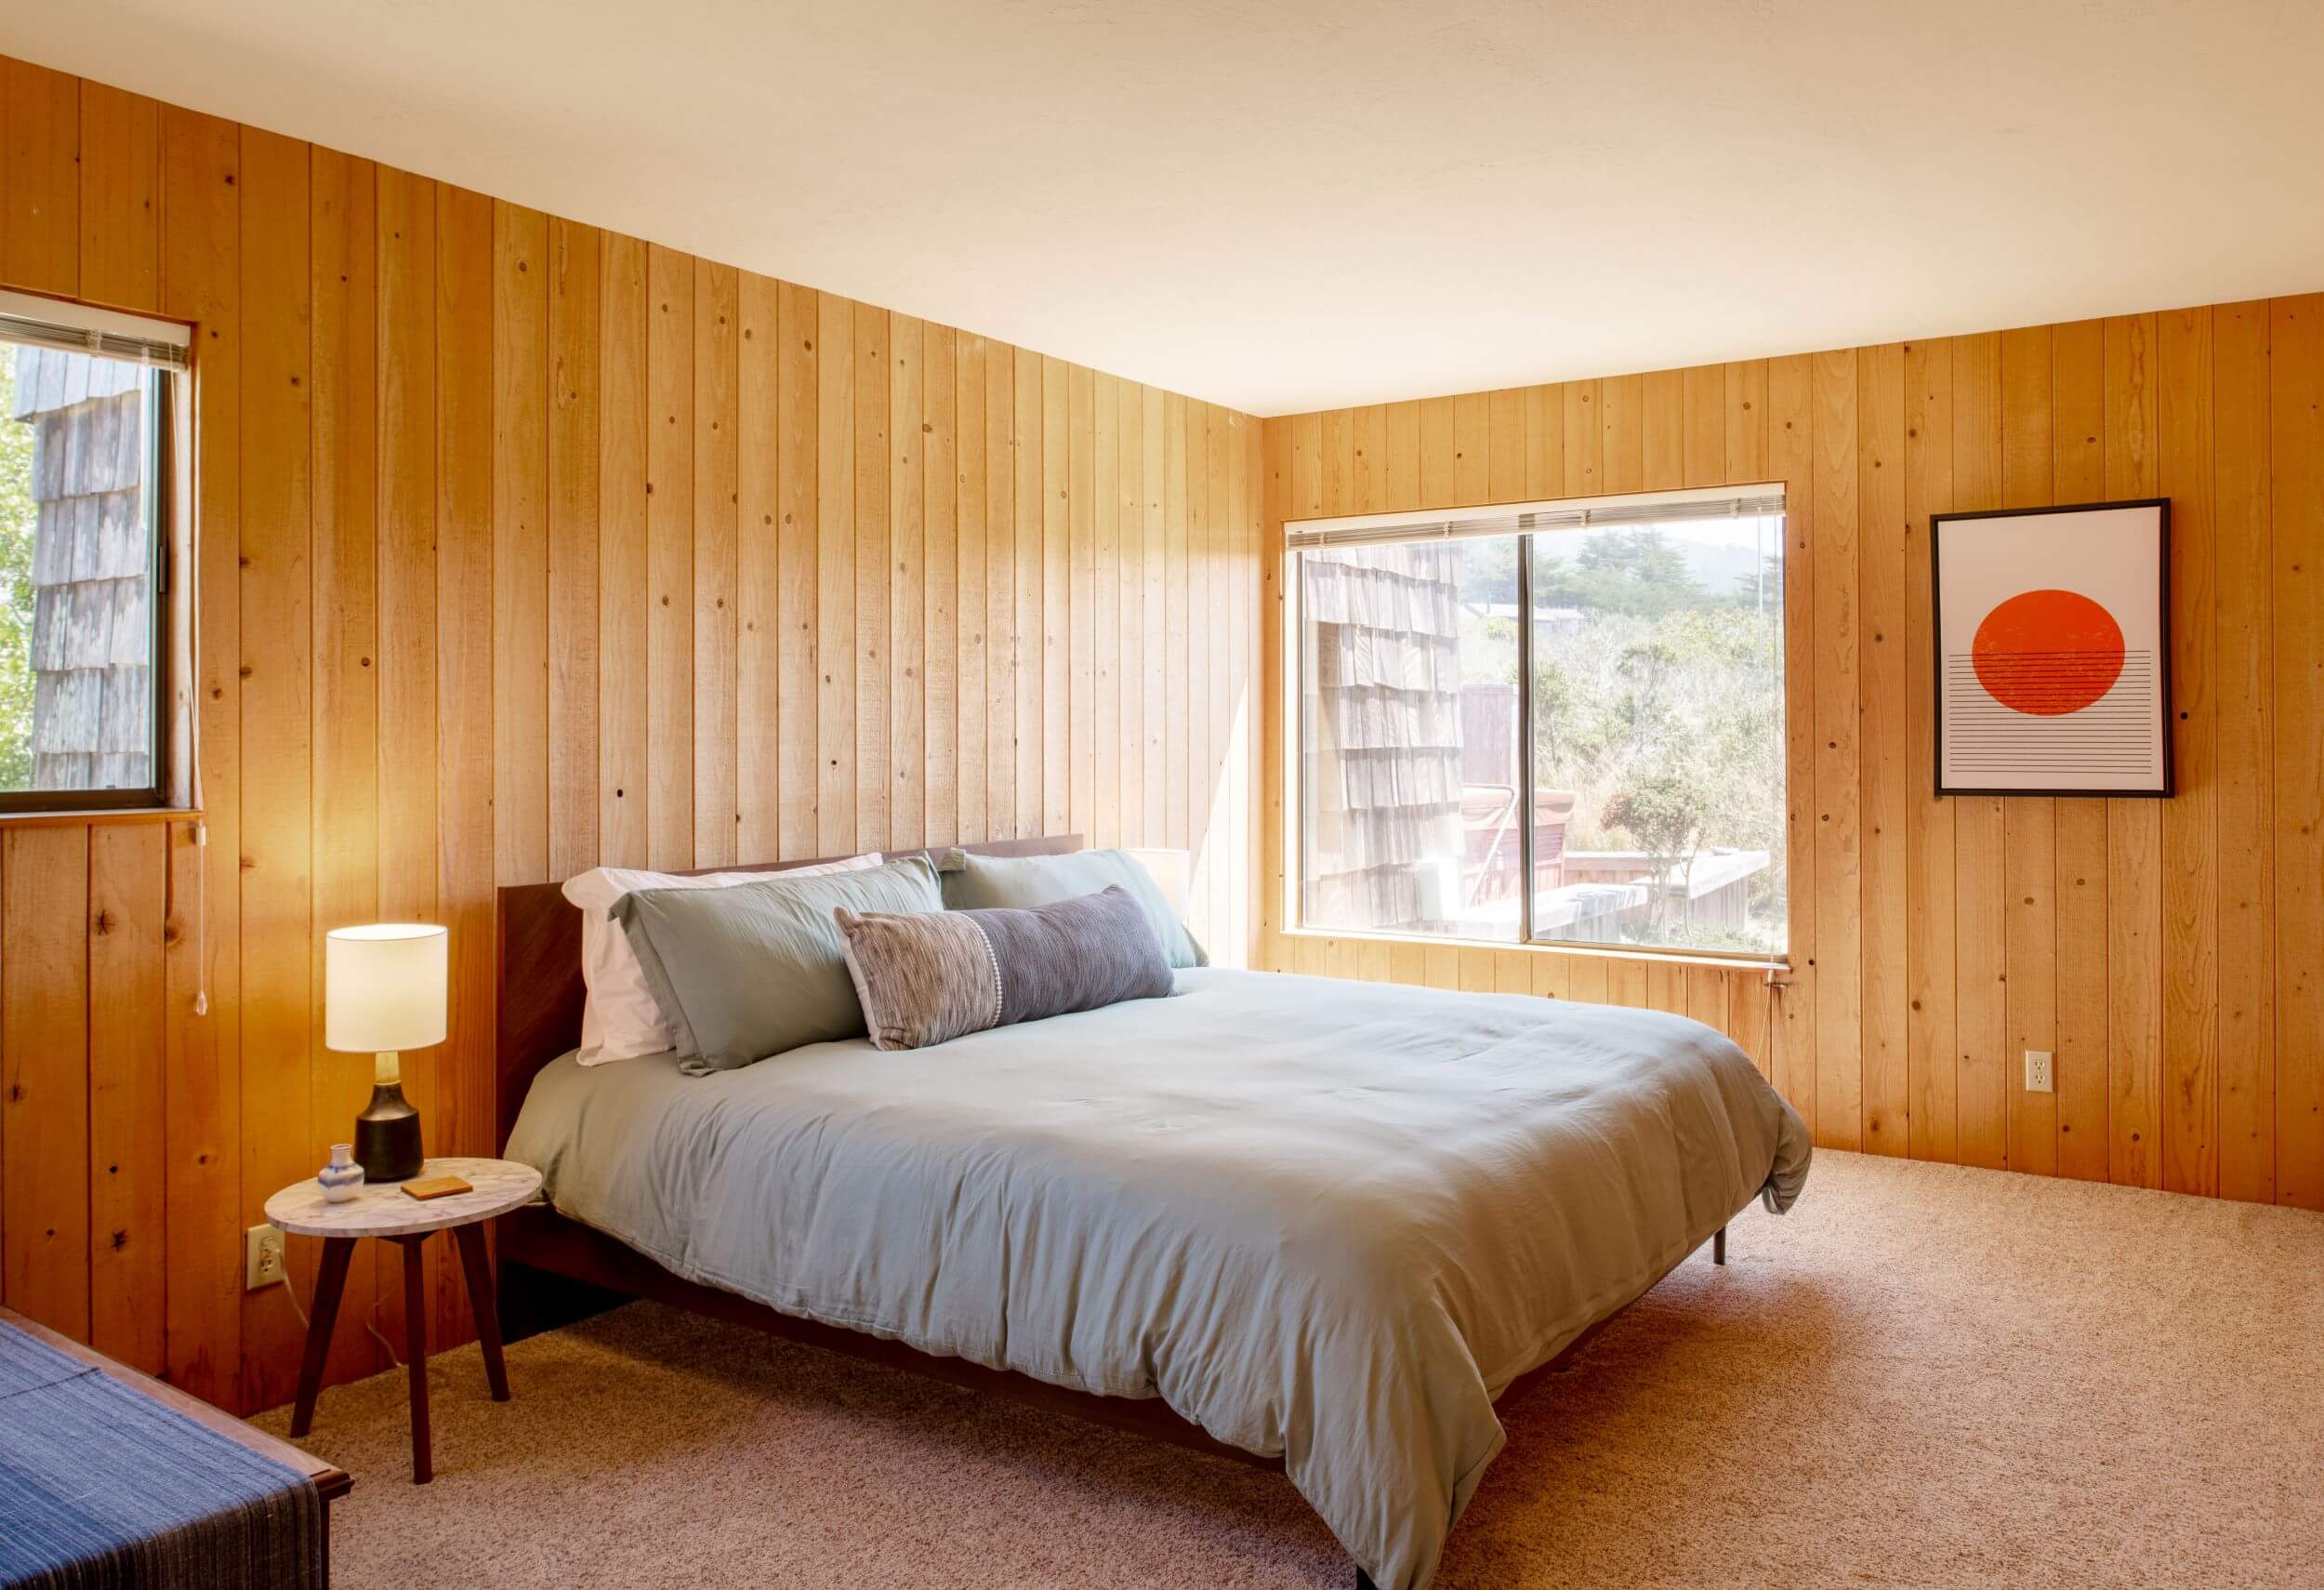 Sea Meadow: 1st large bright bedroom with wood walls and large window looking onto meadow.